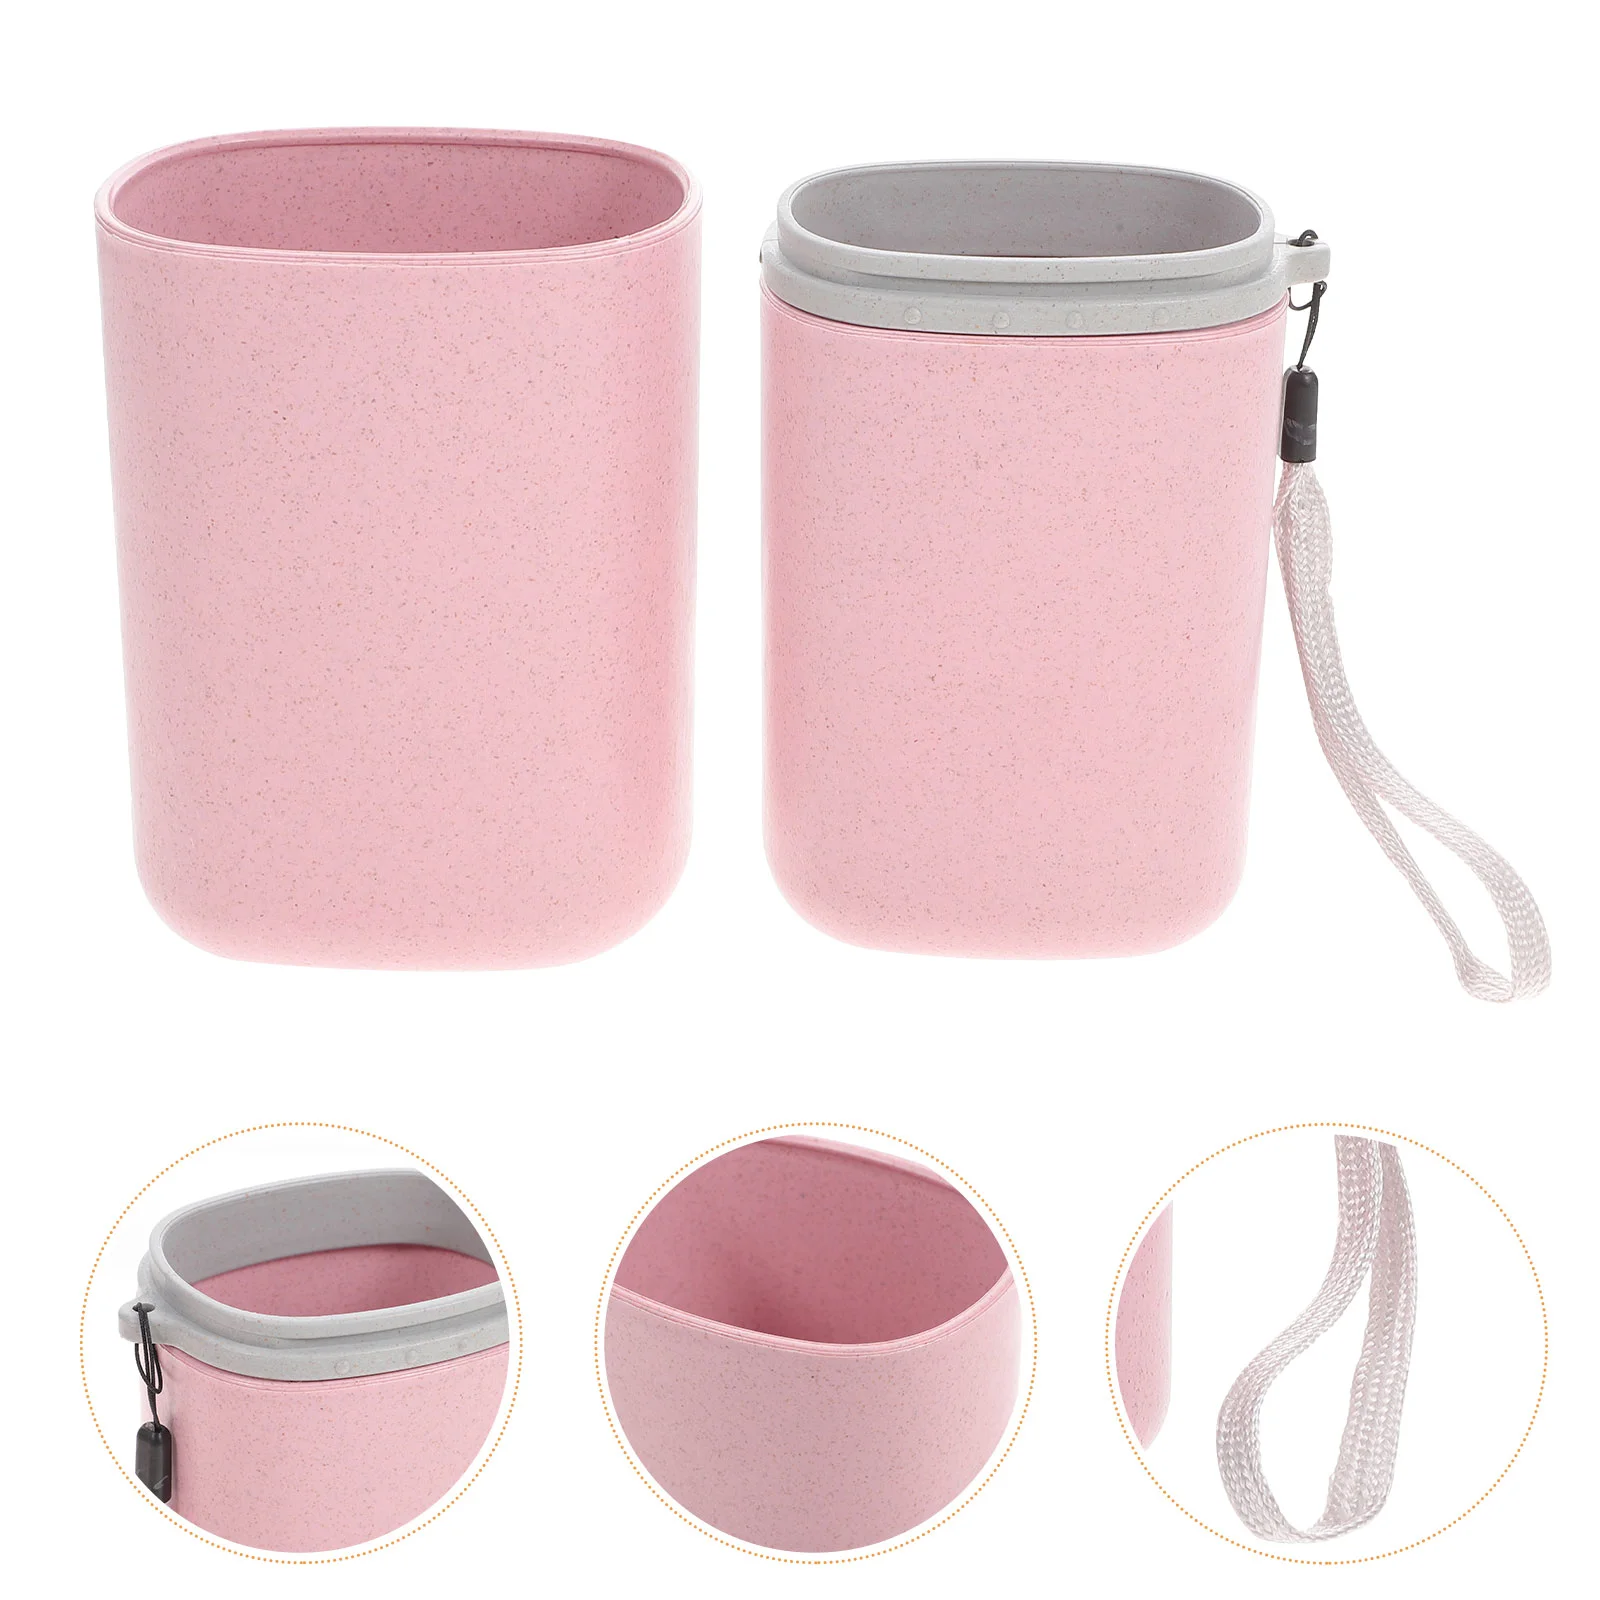 

Travel Toothpaste Container Holder Case Plastic Portable Cover Outdoor Cup Proof Box Boxes Hotel Carrier Storage Wash Cups